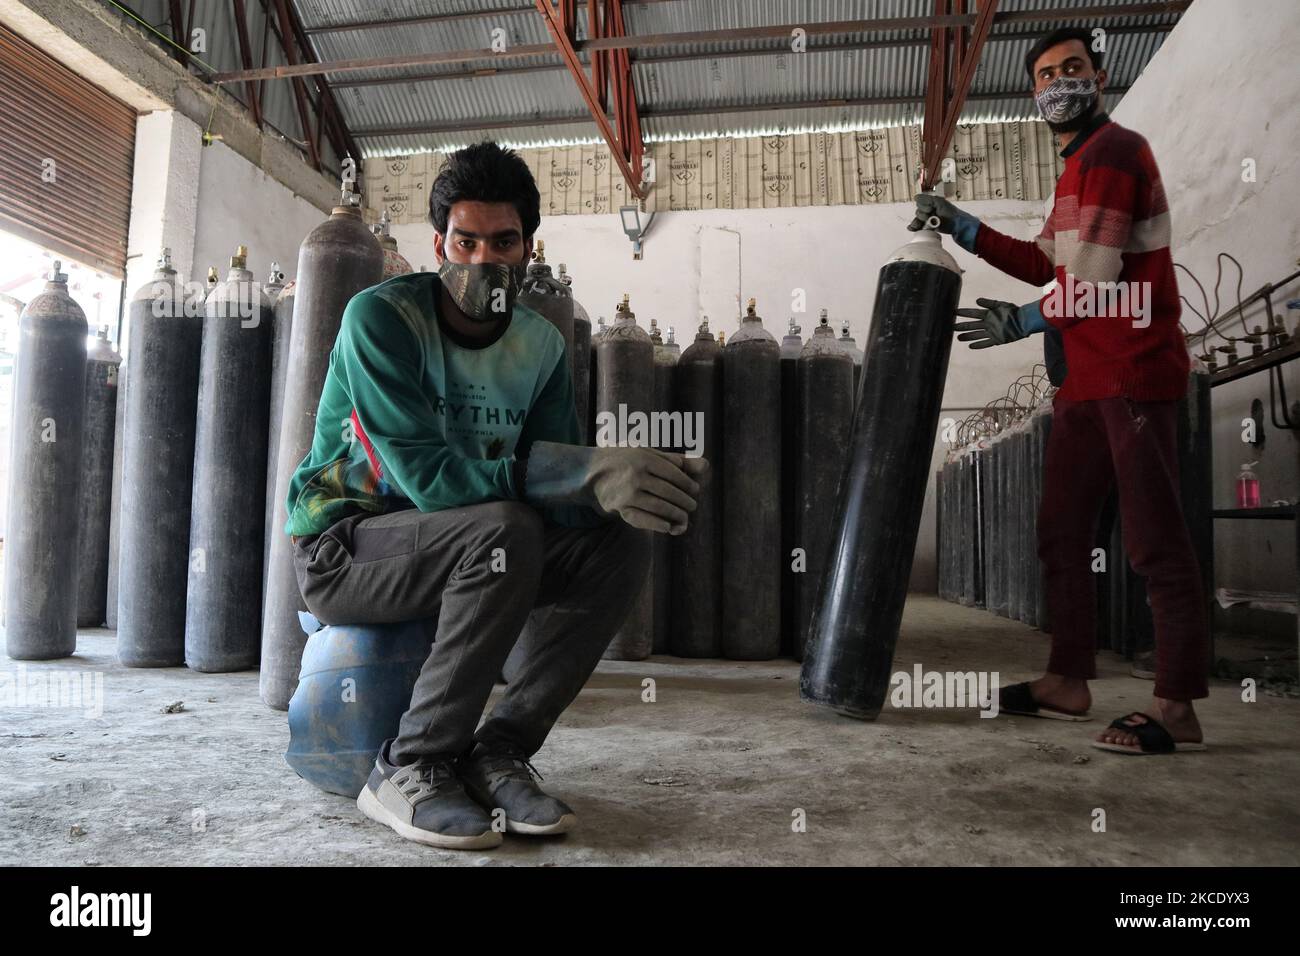 A Worker shifts oxygen cylinders at an oxygen refiiling facility as hopitals face oxygen shortages in Srinagar, Indian Administered Kashmir on 03 May 2021. Jammu and Kashmir records 51 deaths which is the highest number of Covid-19 related deaths in the region. However, India reported nearly 370,000 fresh covid-19 cases and 3421 new deaths. (Photo by Muzamil Mattoo/NurPhoto) Stock Photo